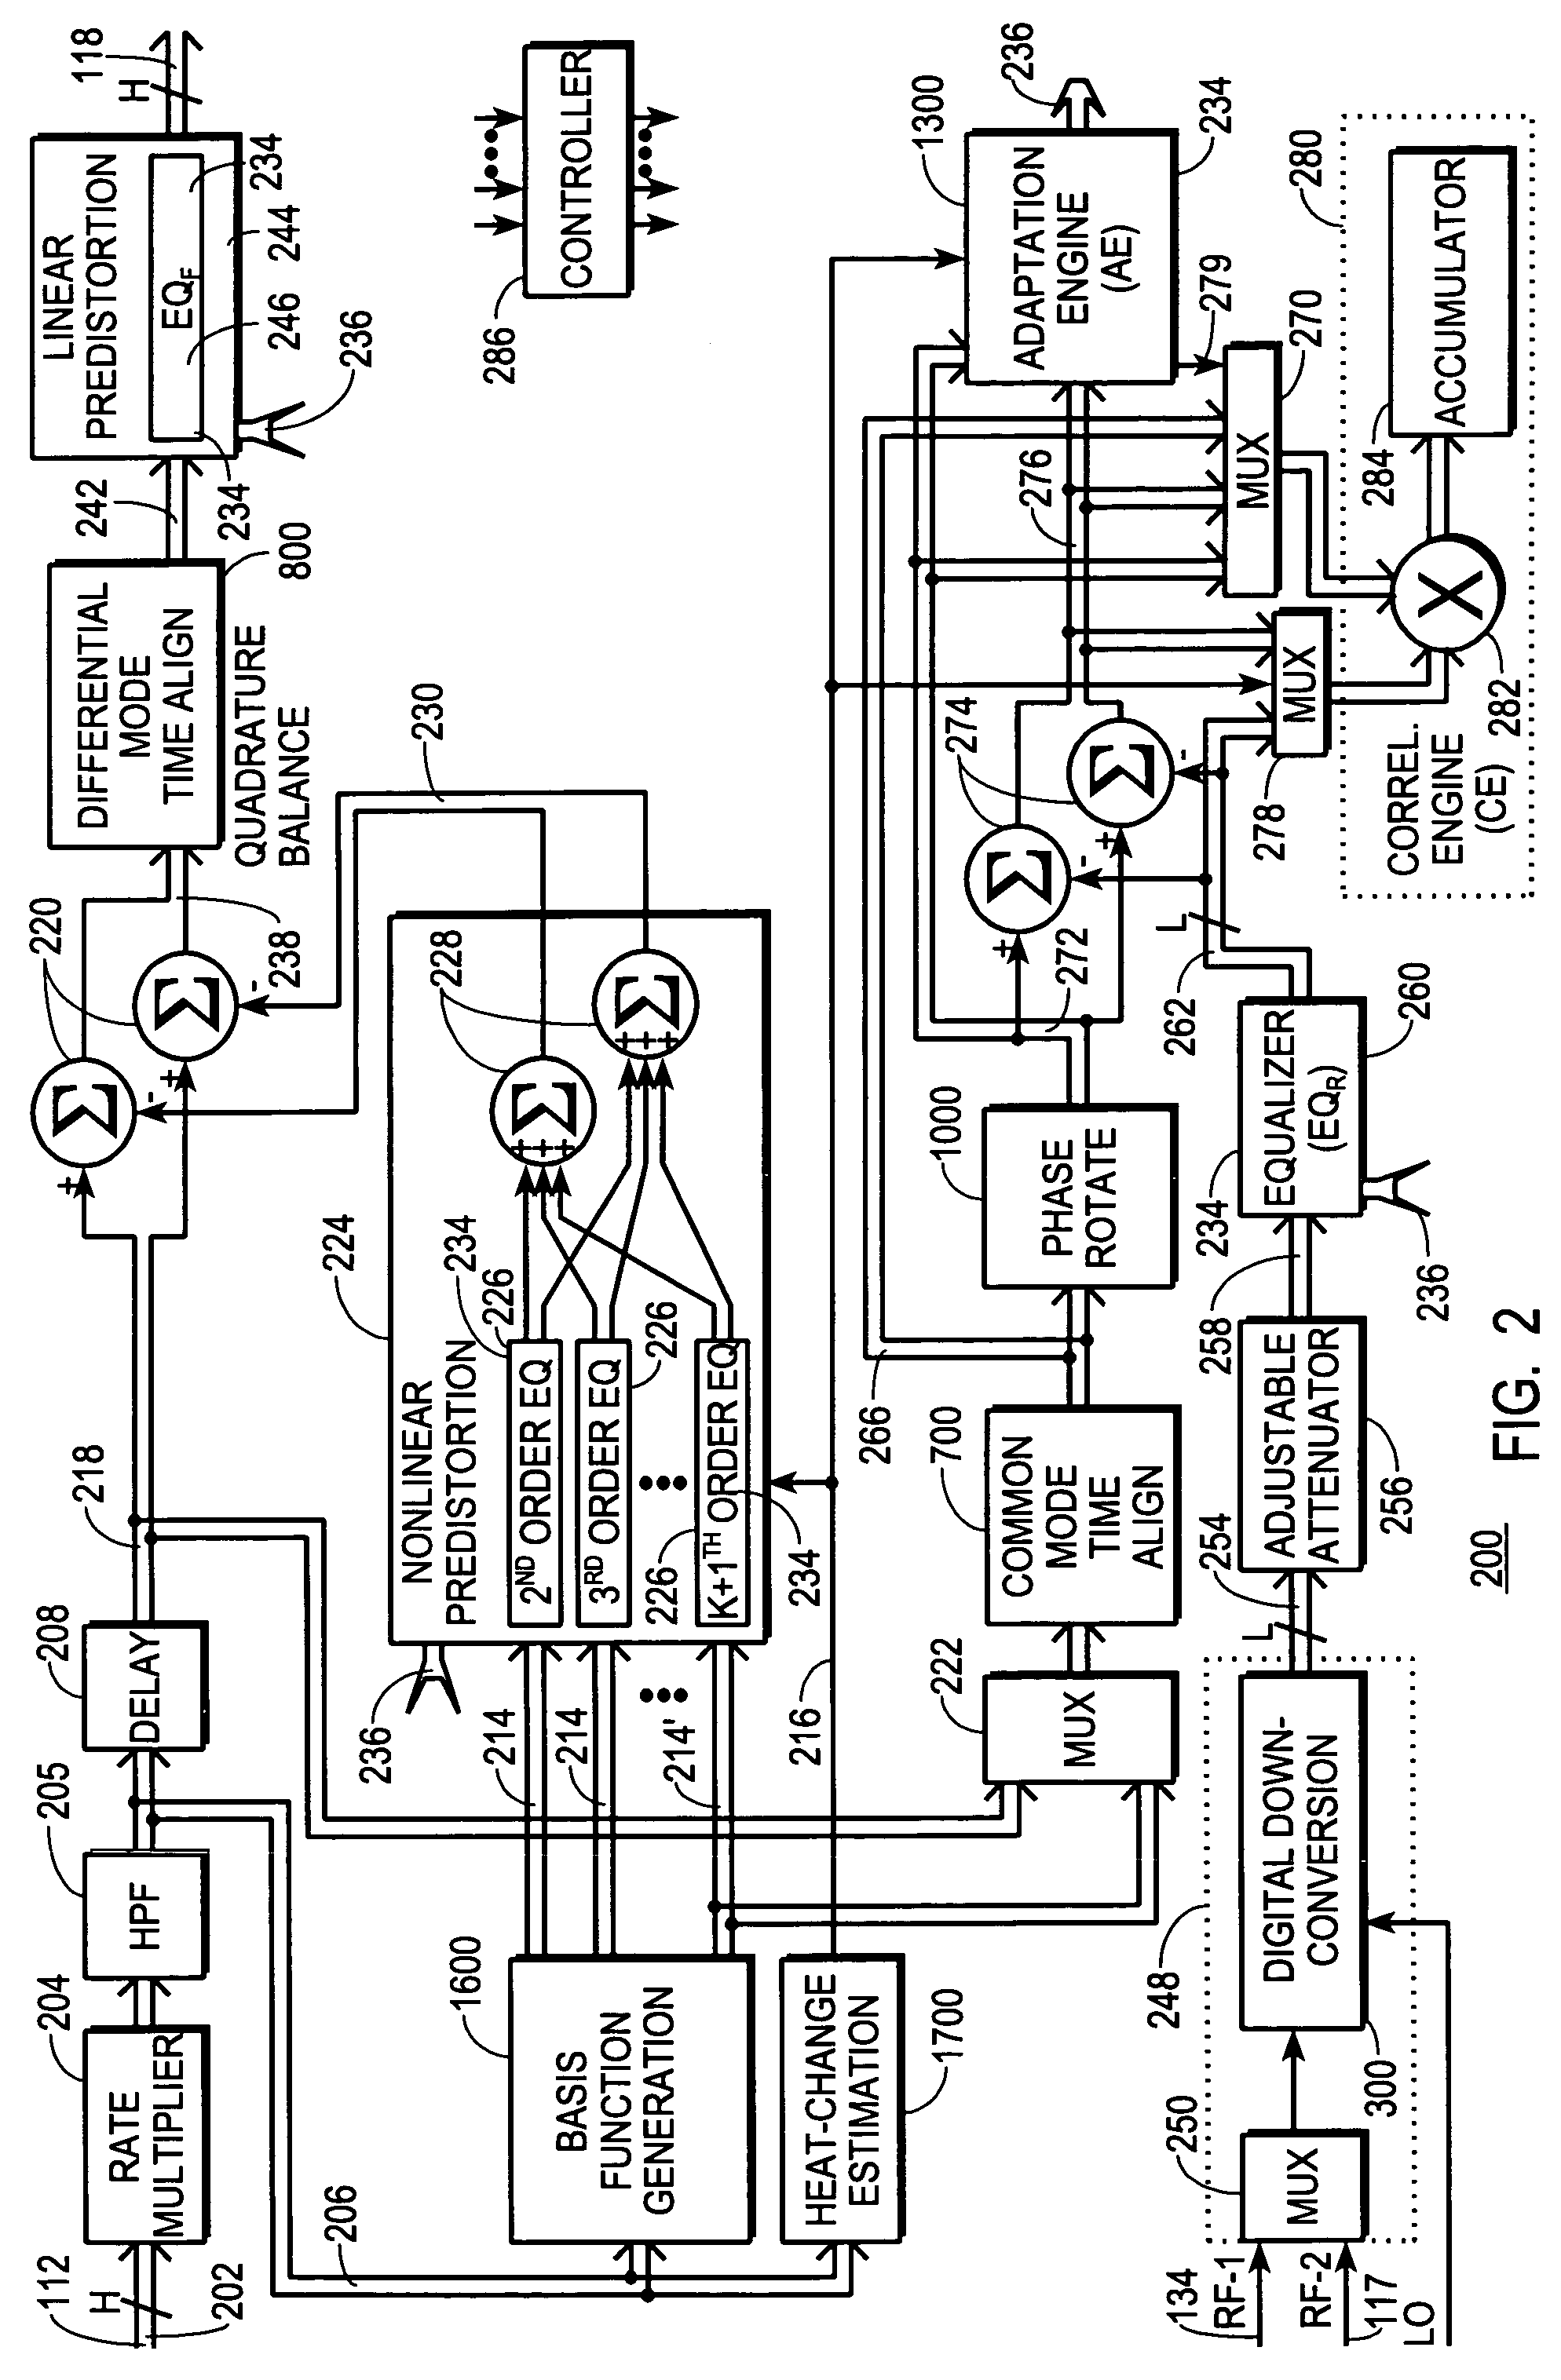 Predistortion circuit and method for compensating A/D and other distortion in a digital RF communications transmitter